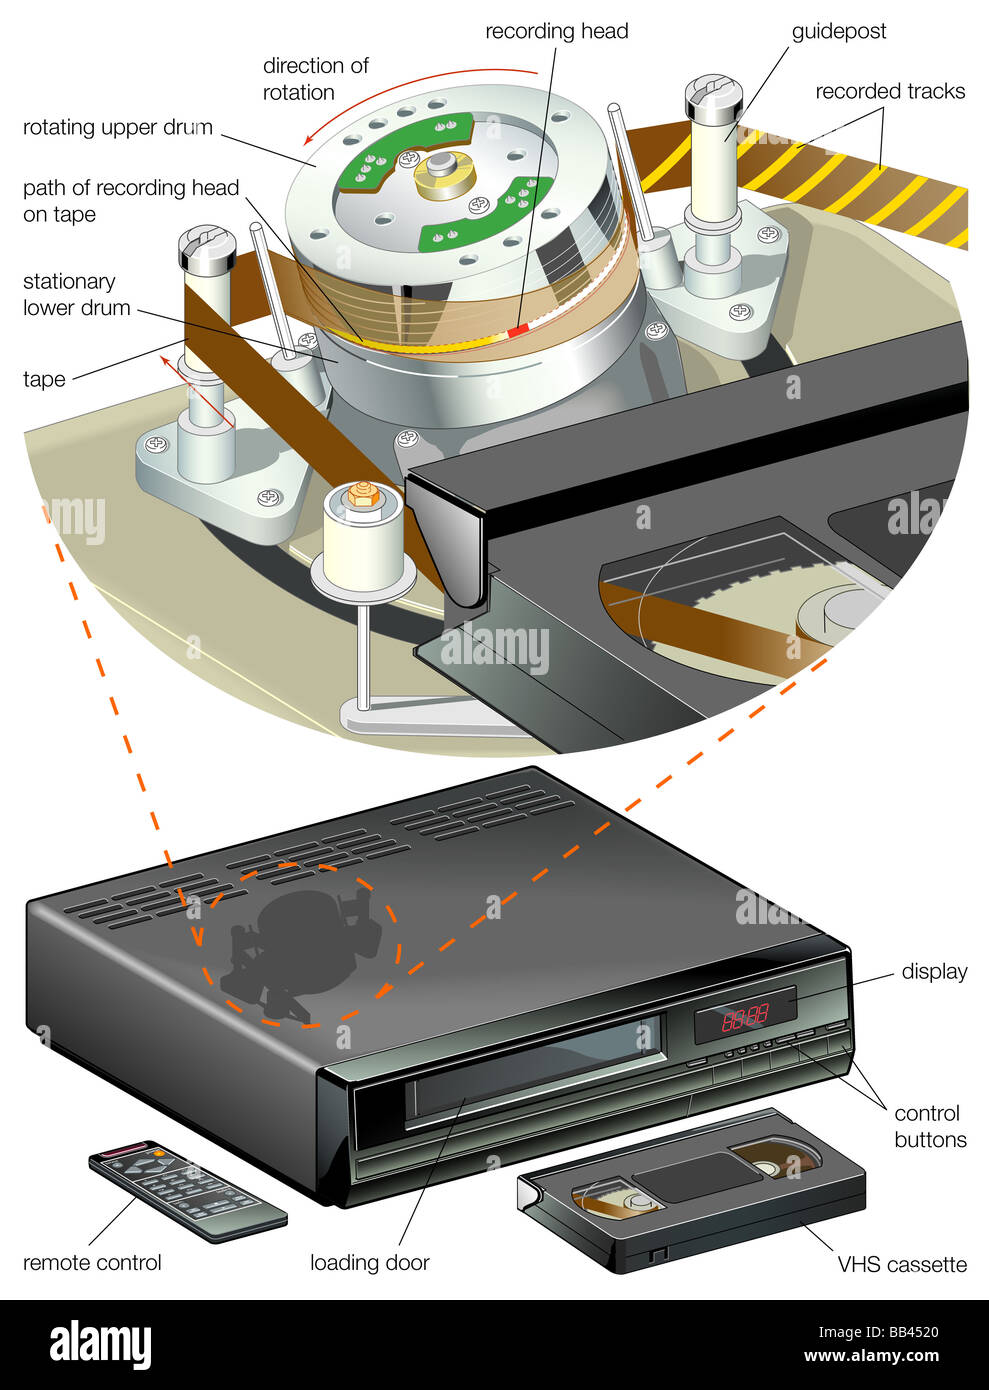 Detail of the inner components of a home videocassette recorder. Stock Photo